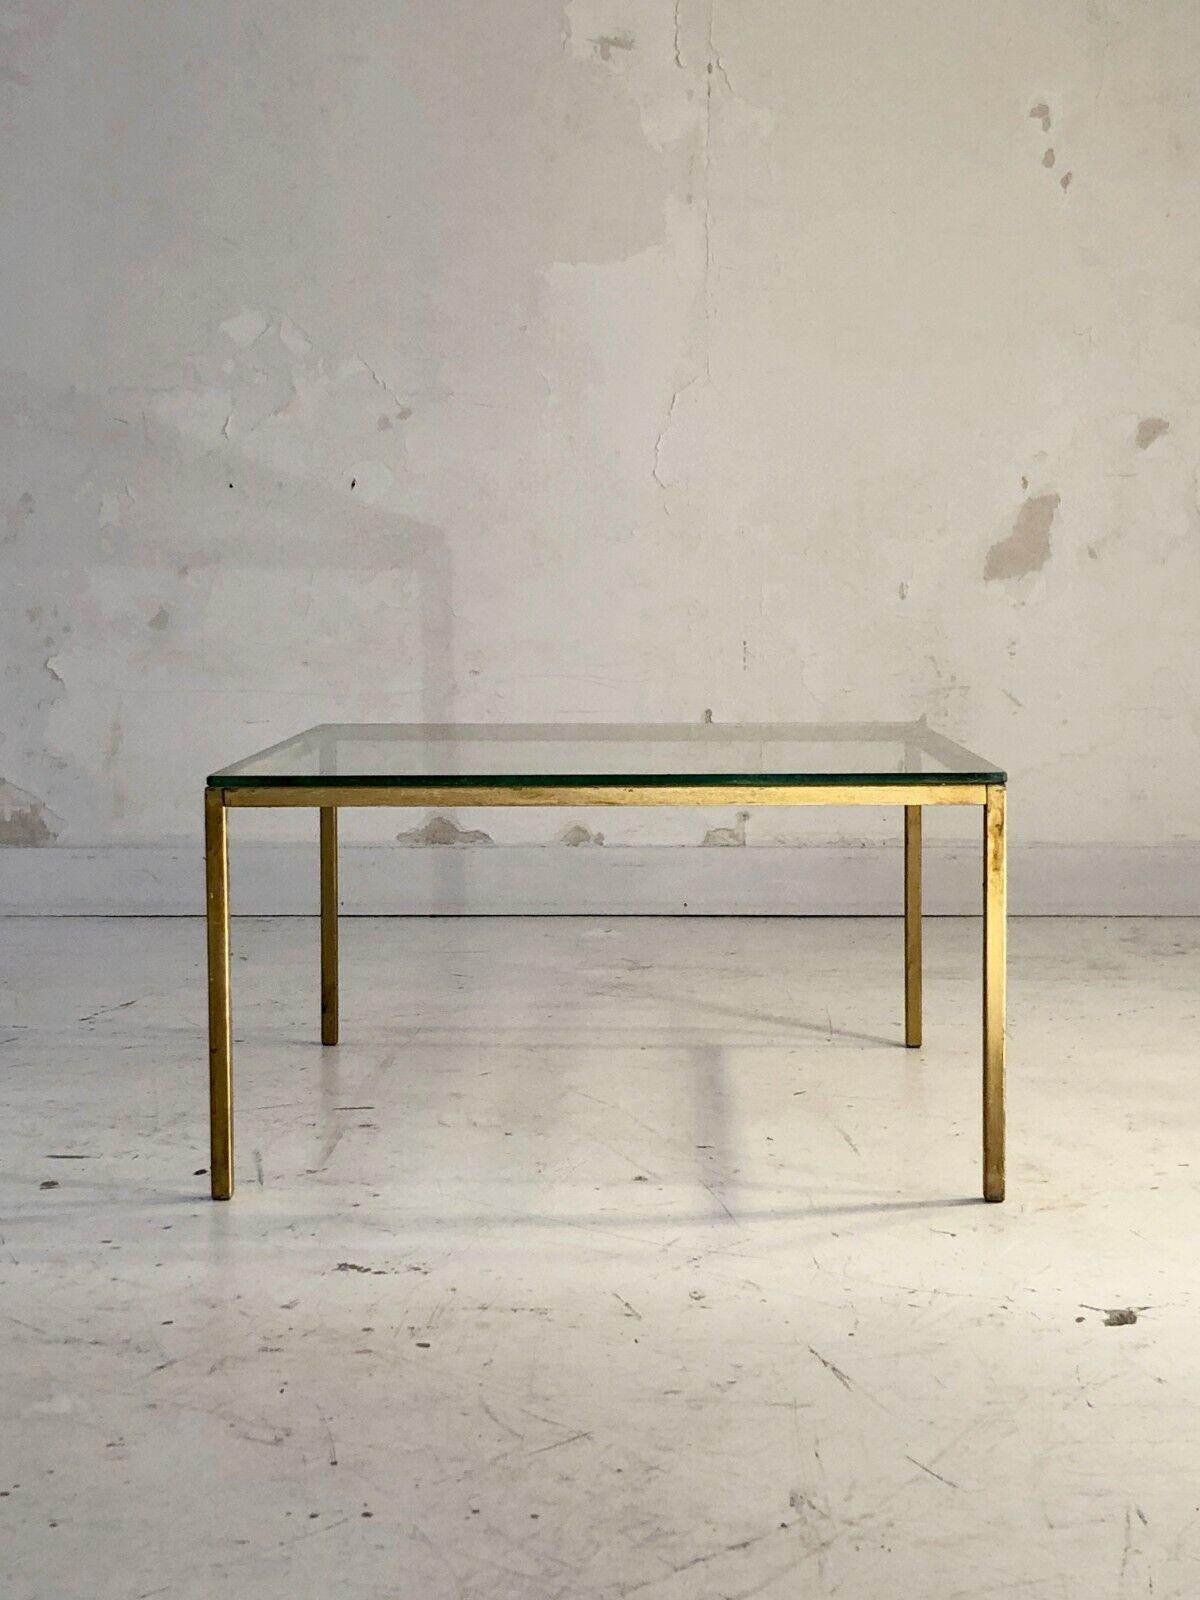 A NEO-CLASSICAL ART-DECO MODERNIST Side COFFEE TABLE, ROGER THIBIER, Frankreich 1970 im Angebot 2